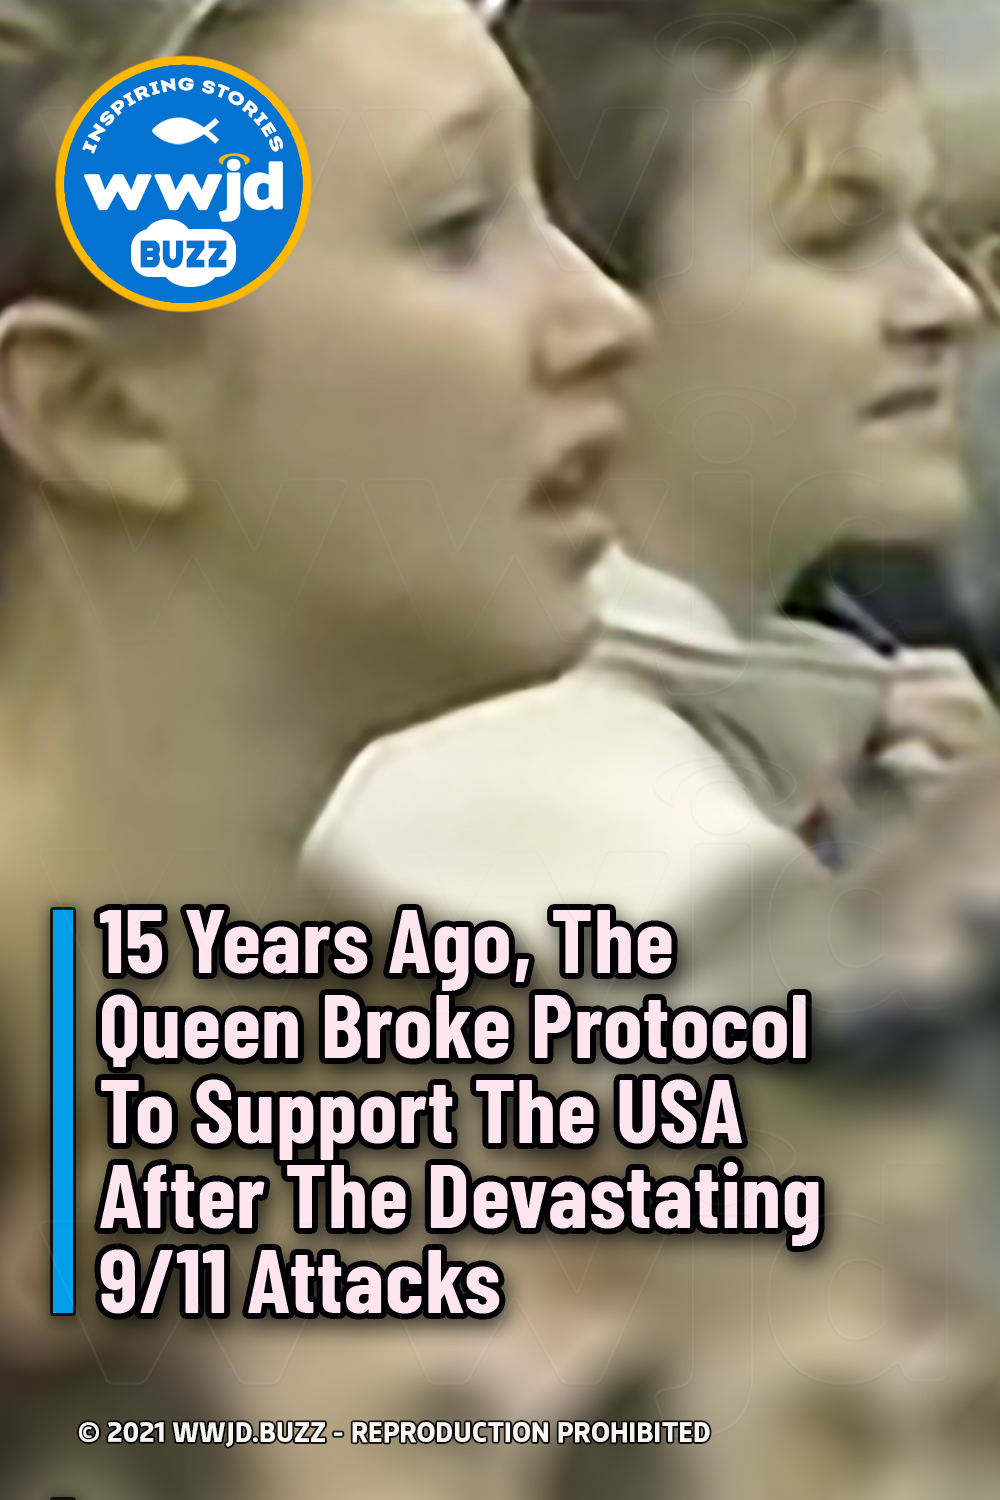 15 Years Ago, The Queen Broke Protocol To Support The USA After The Devastating 9/11 Attacks